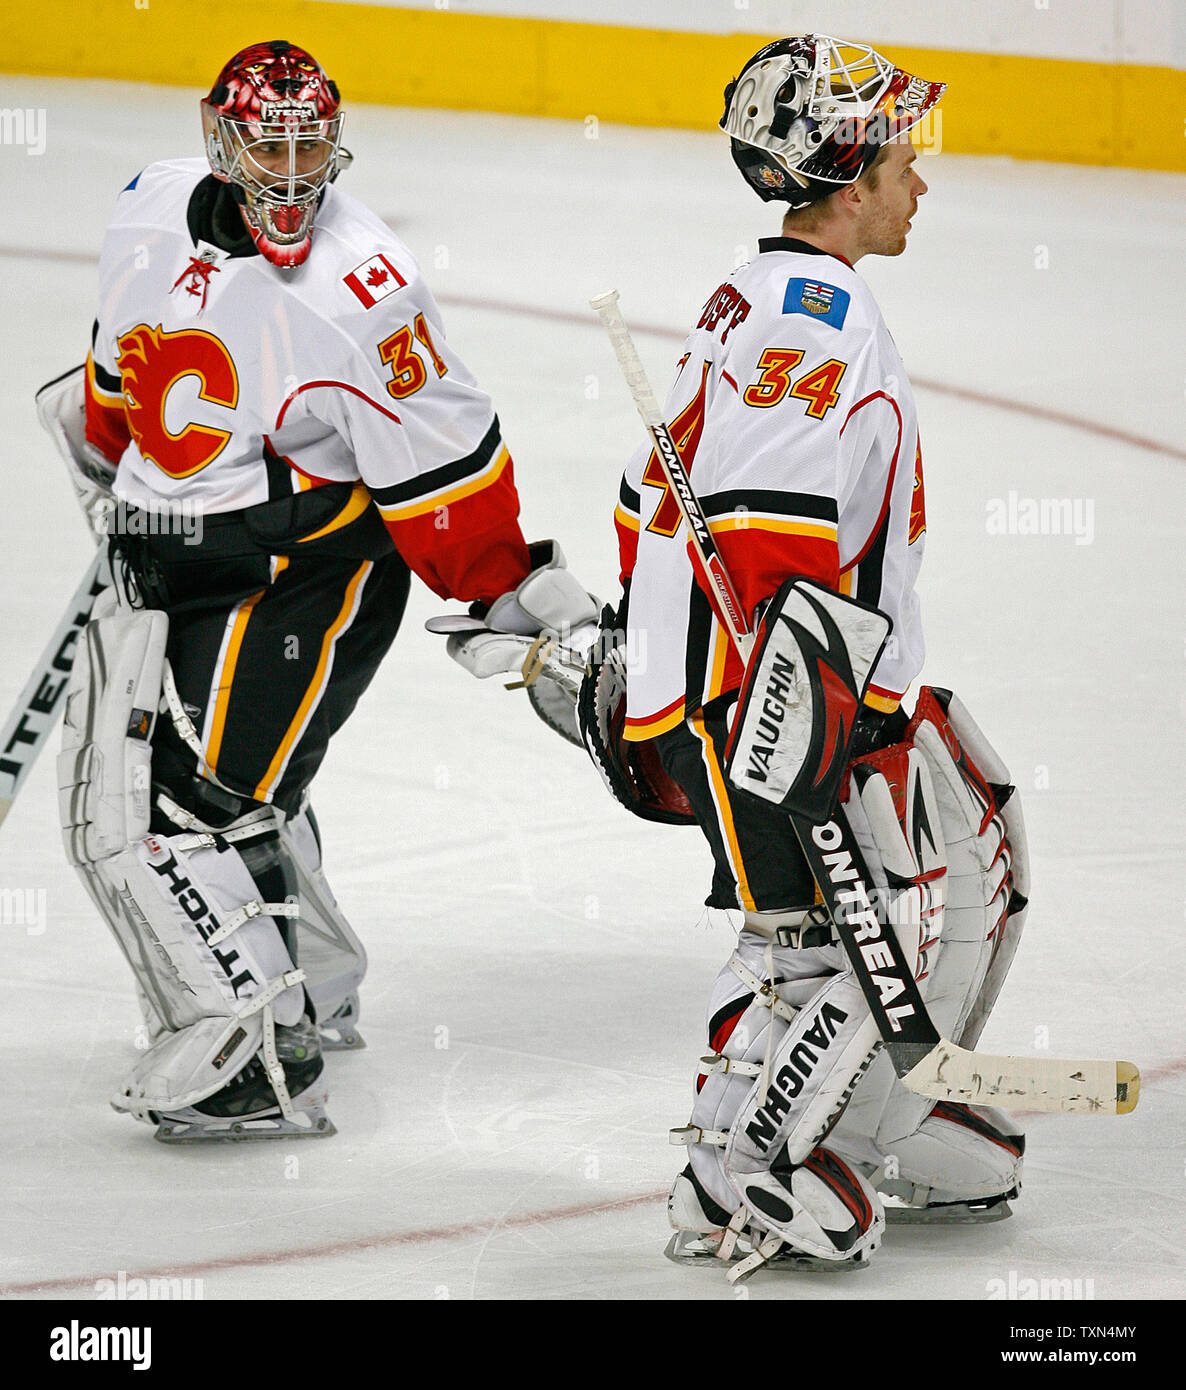 Calgary Flames starting goalie Miikka Kiprusoff (R) of Finland skates off  the ice after being replaced against the Colorado Avalanche during the  third period at the Pepsi Center in Denver on March